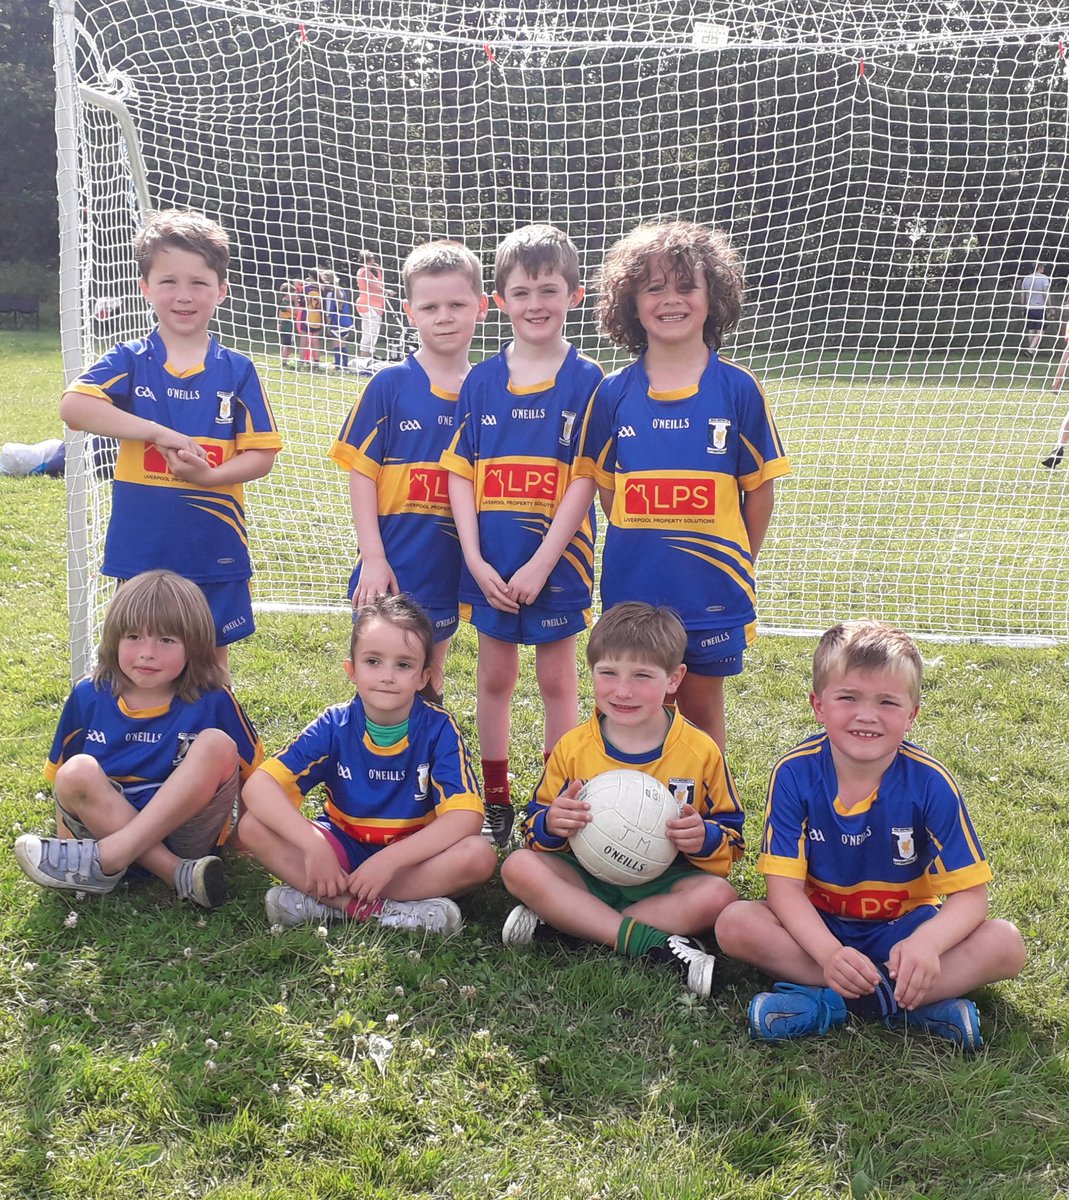 Youth Games continued today for U-7's, U-9's & U-15's. Lots of great Gaelic Football skills on show. Thanks to @St_LawrencesGAA for hosting and all other clubs, players, coaches and parents for their support. @StPetersGAAManc @StBrendansGAA @JohnMitchelsGAA @GAAYouthJM @JFKGAA